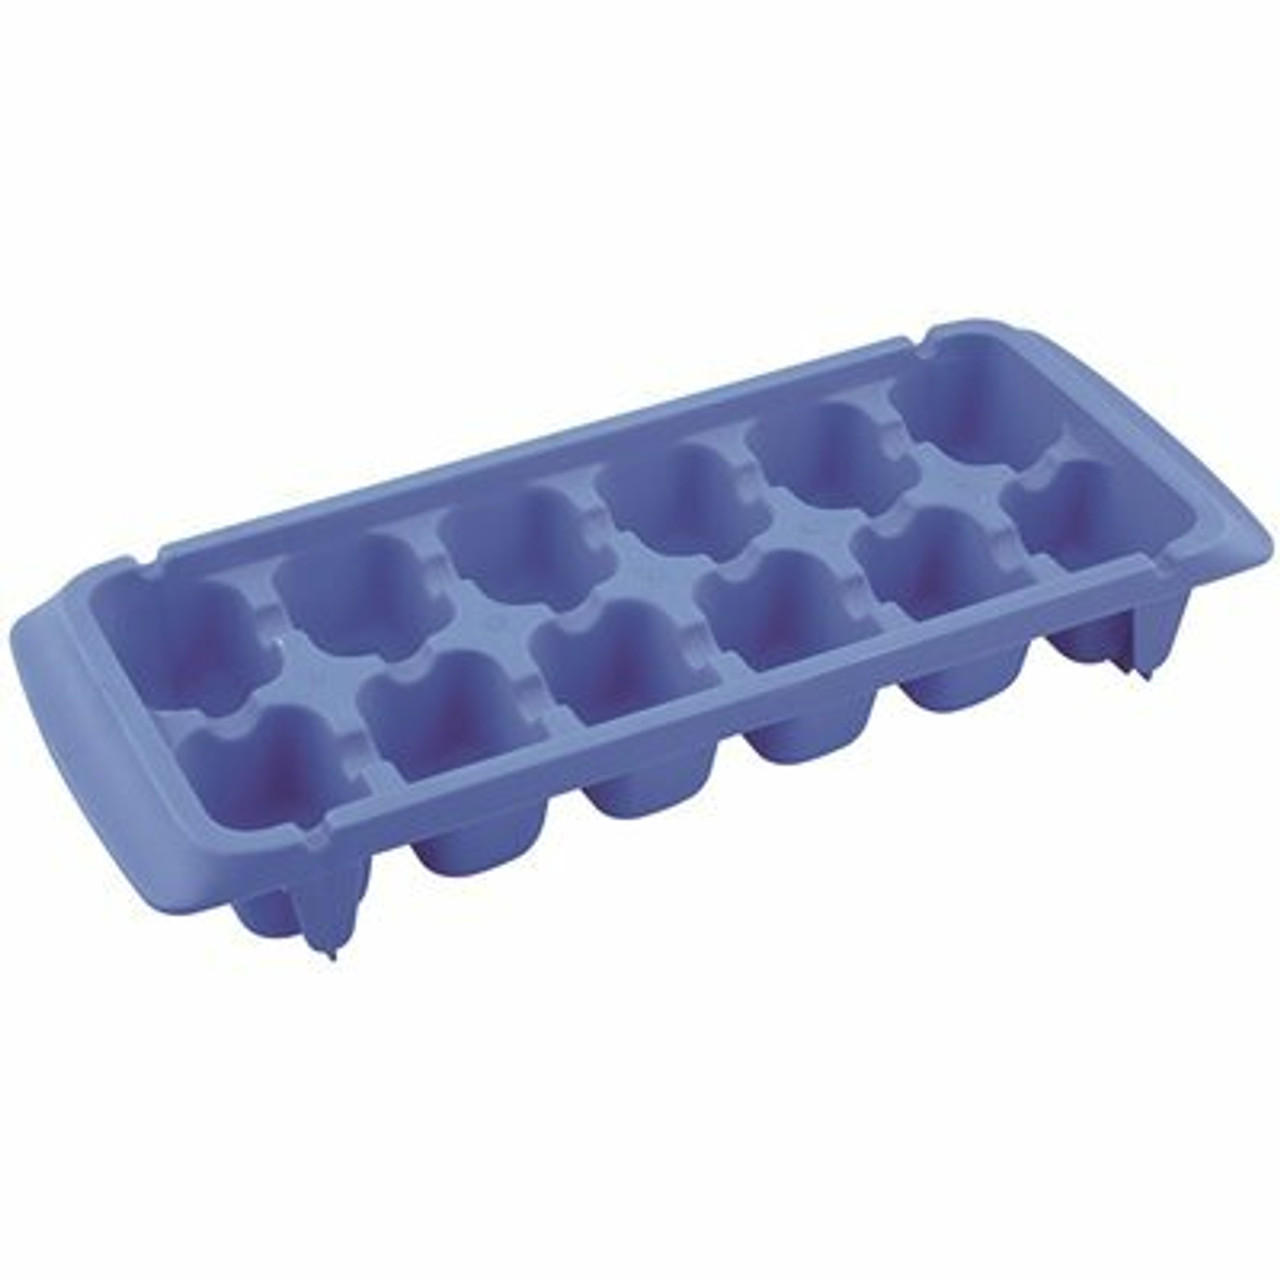 Prime-Line Standard Plastic Ice Cube Trays (5-Pack)